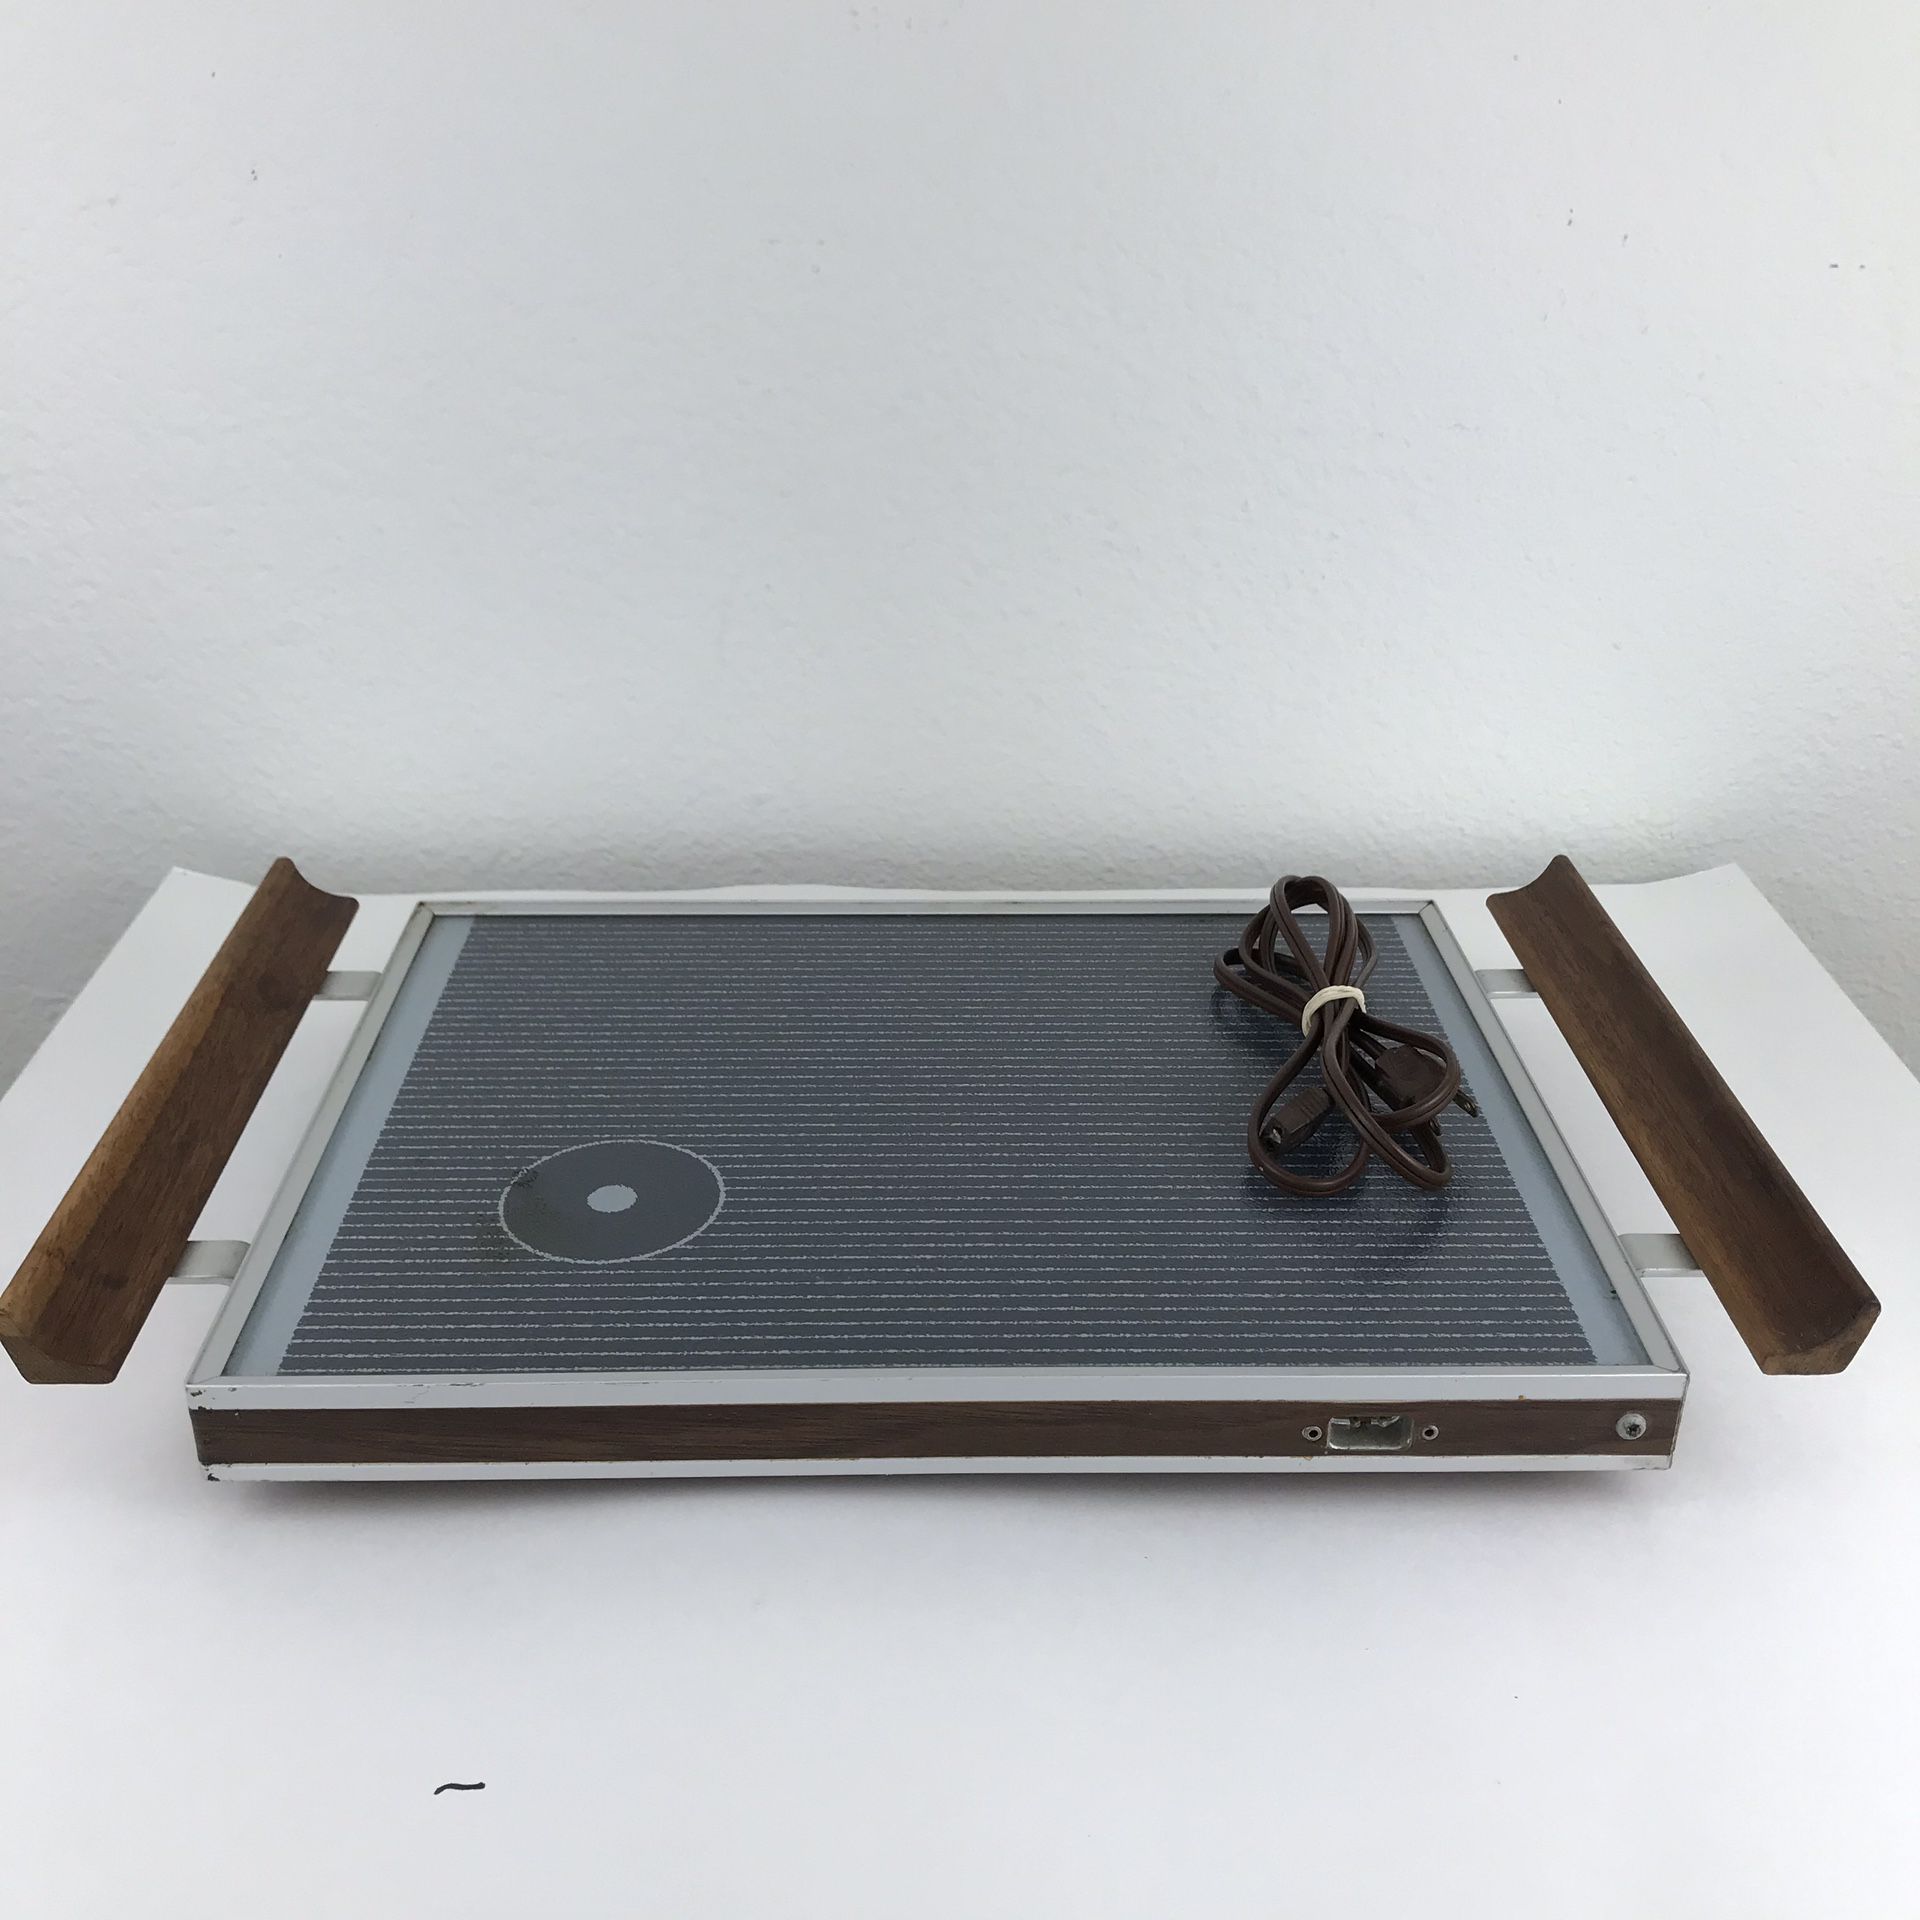 Cornwall Electric Tray Model # 1142 Hot Plate Warmer Camping On/off Switch